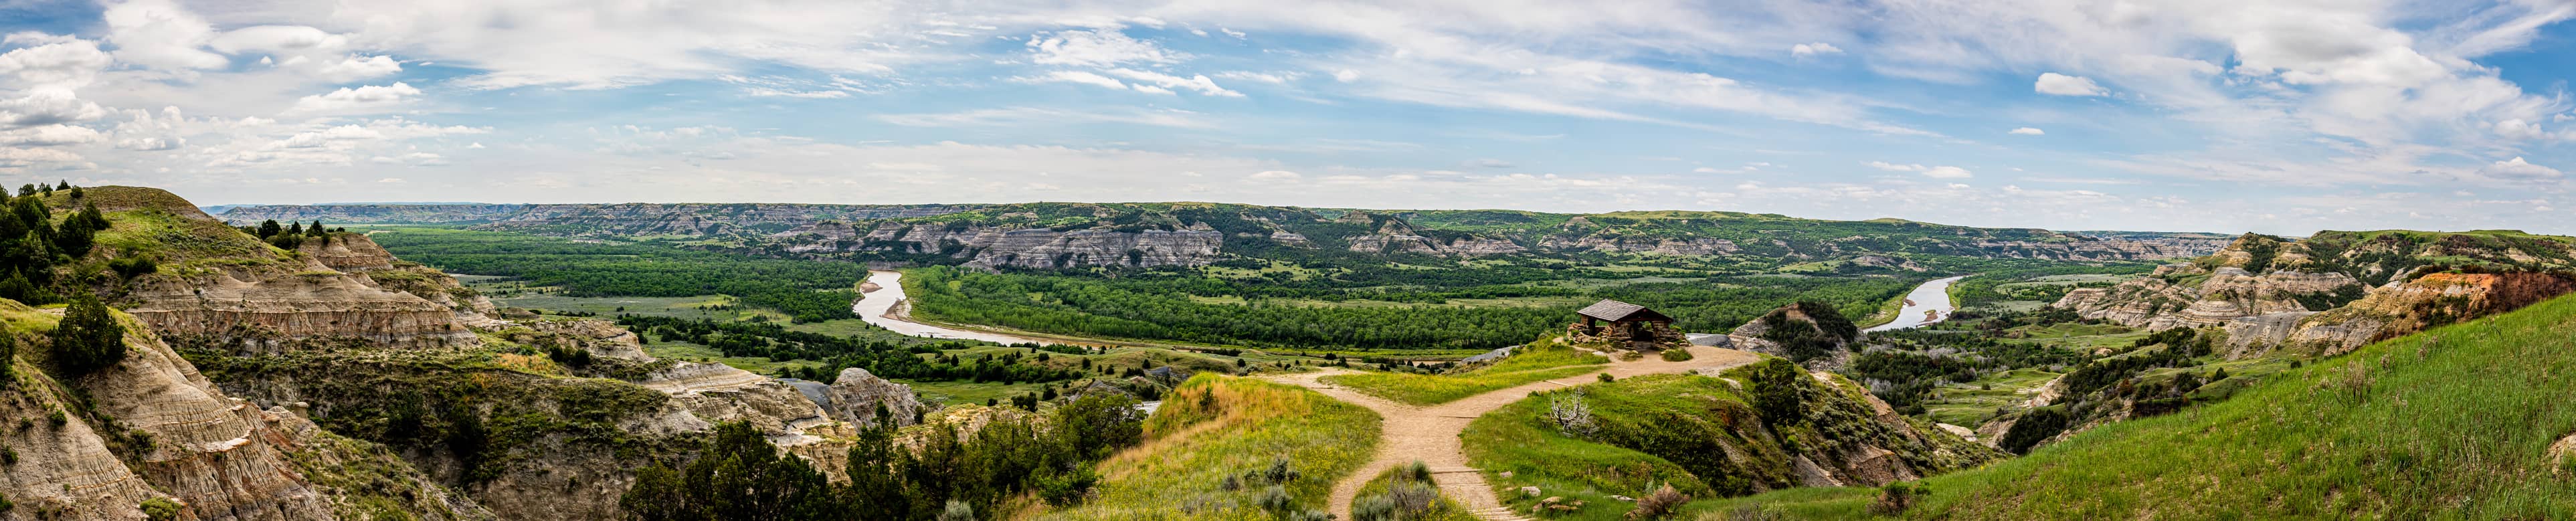 aerial view of Theodore Roosevelt National Park 